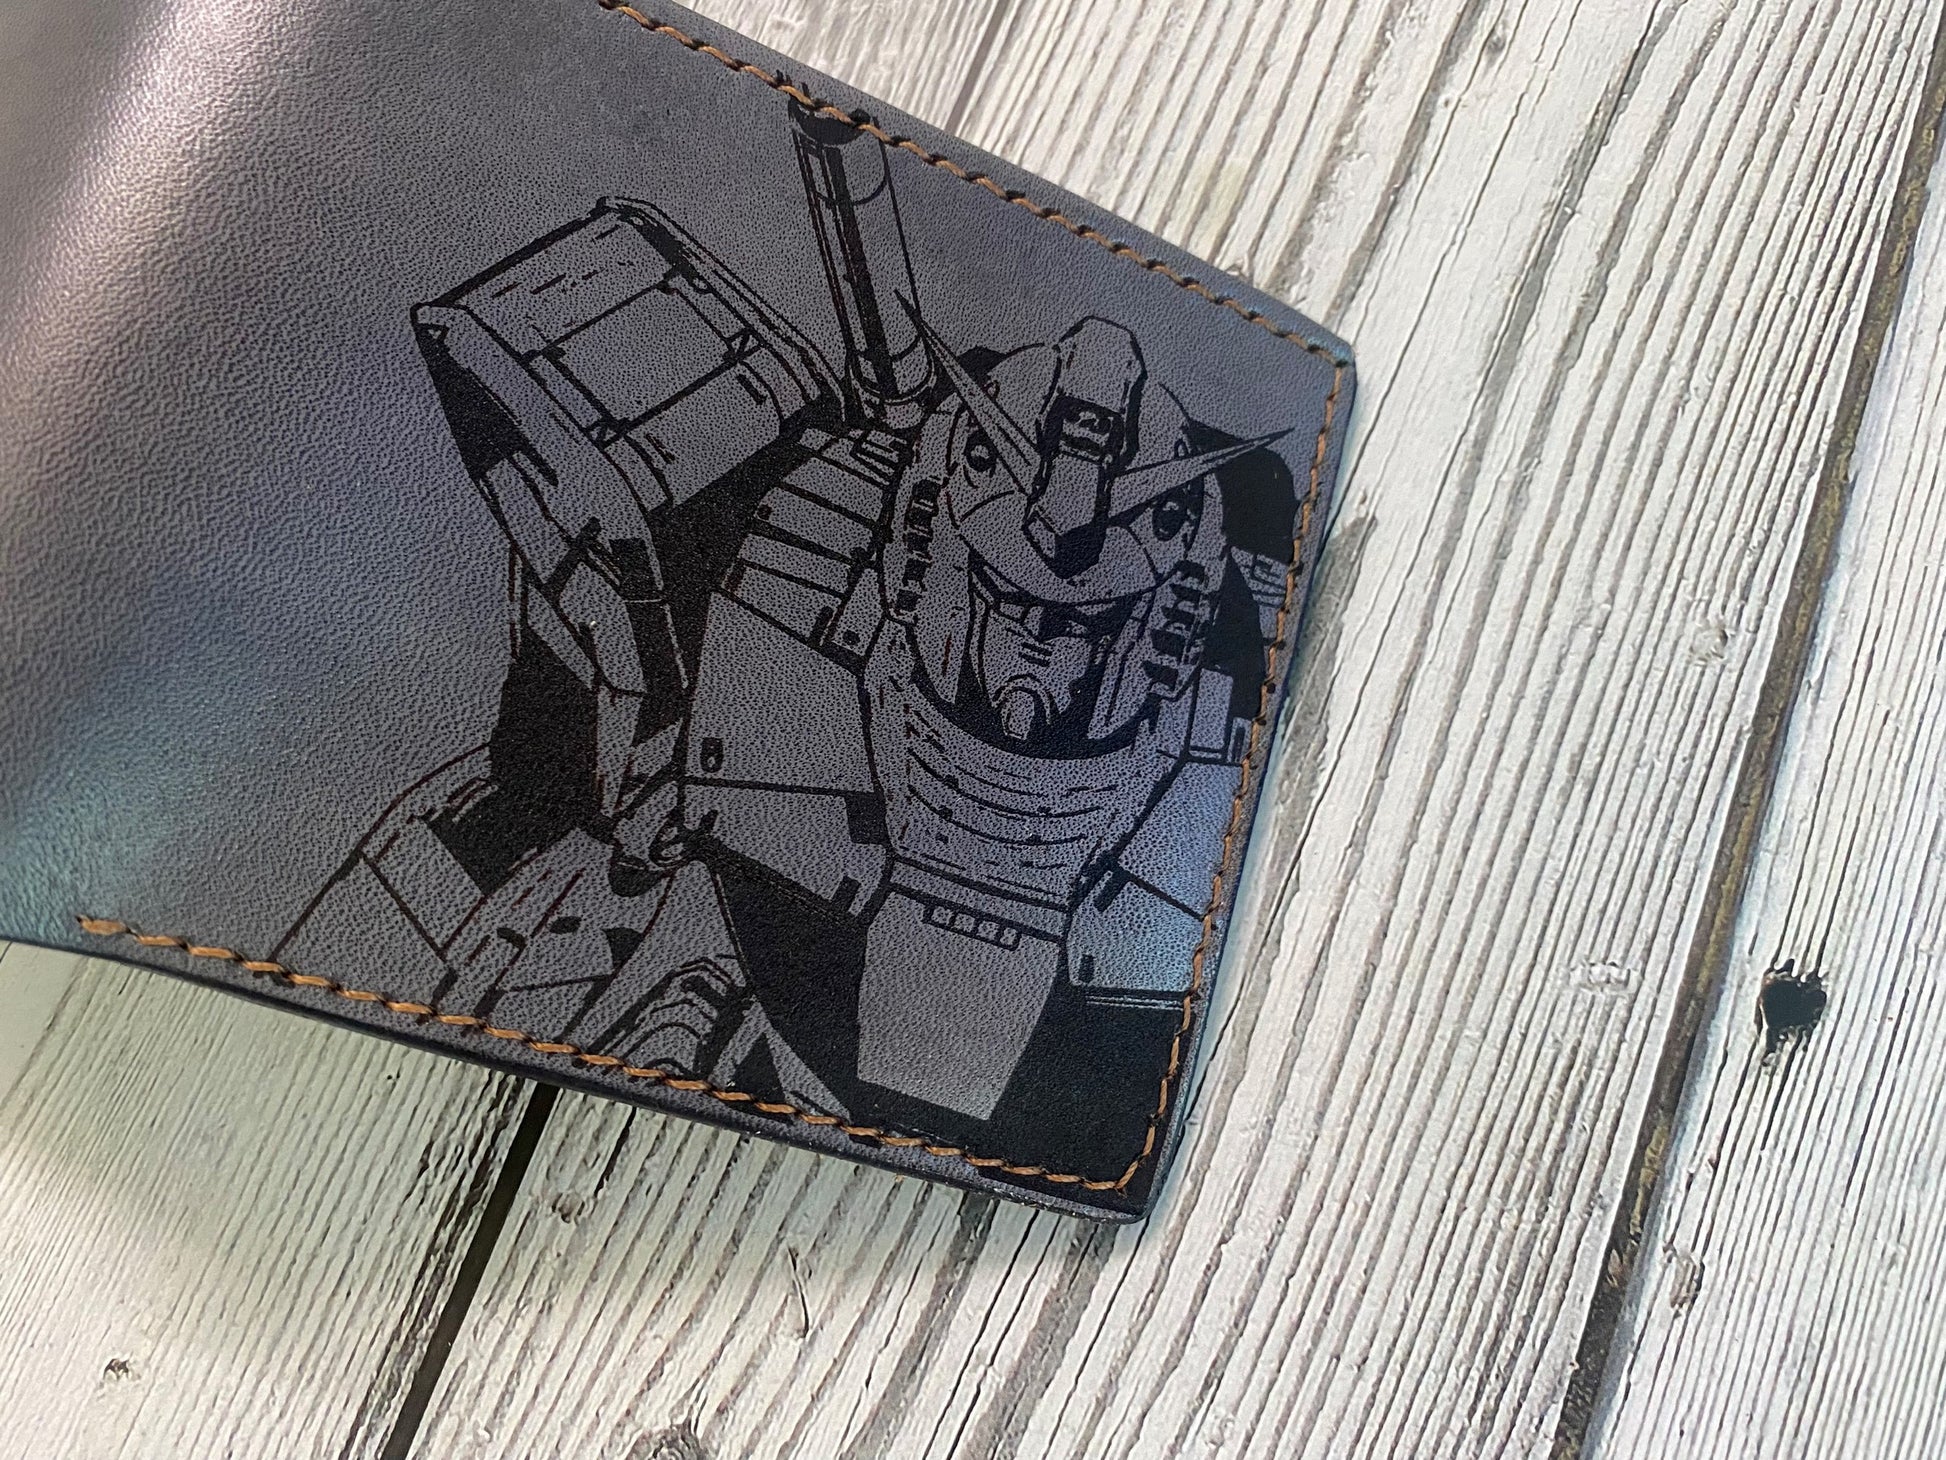 Gundam giant robots art wallet, customized mechanical android Japan wallet, anime robot gift ideas for him, fiction manga art leather gift